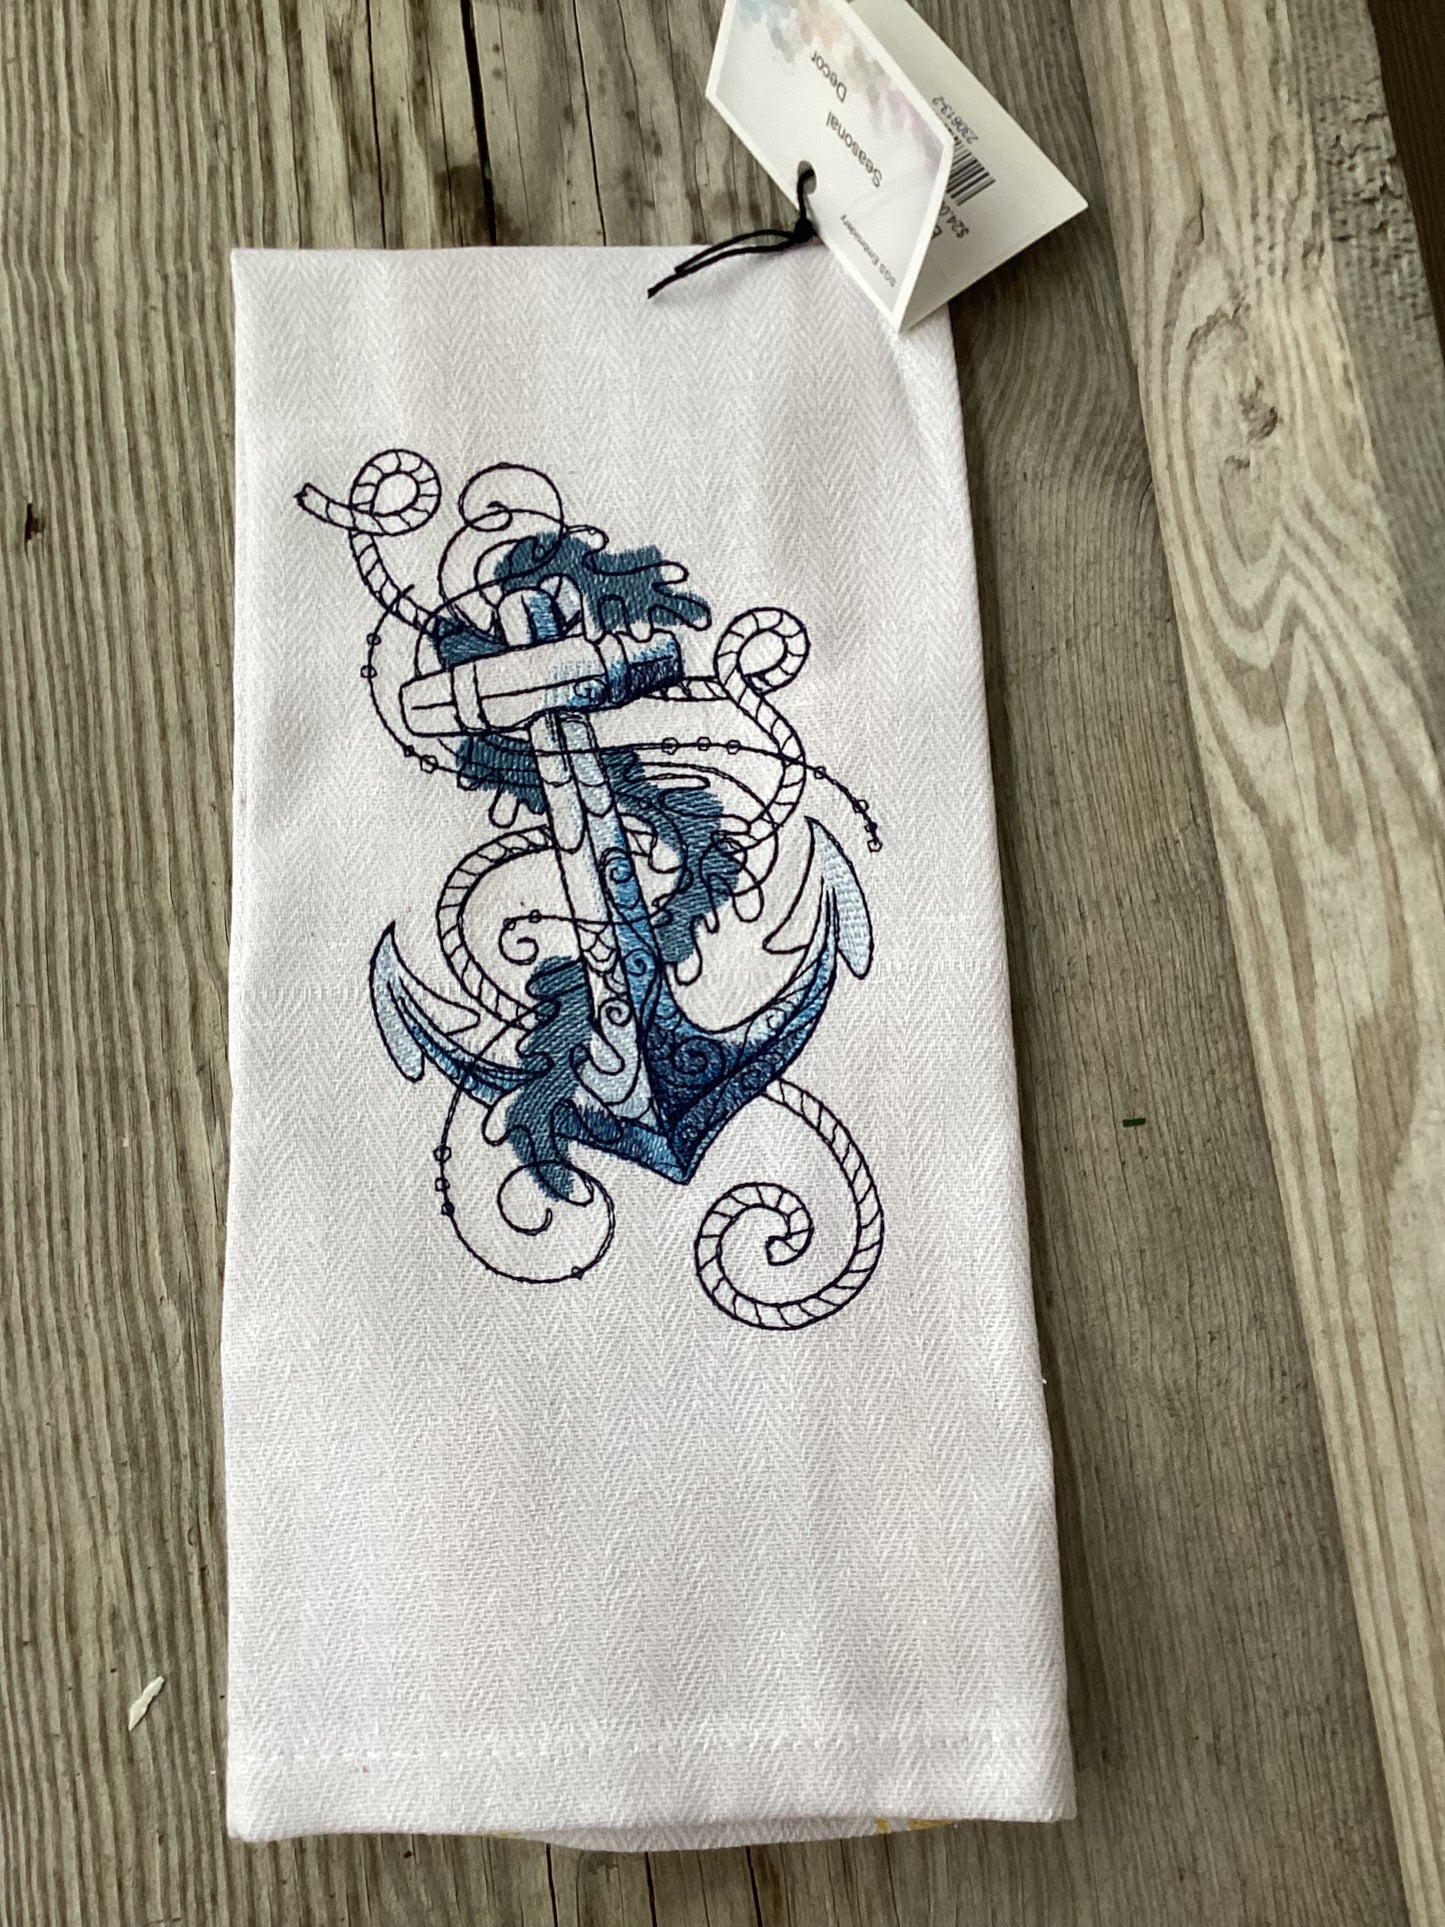 Embroidery Tee Towels Several Designs